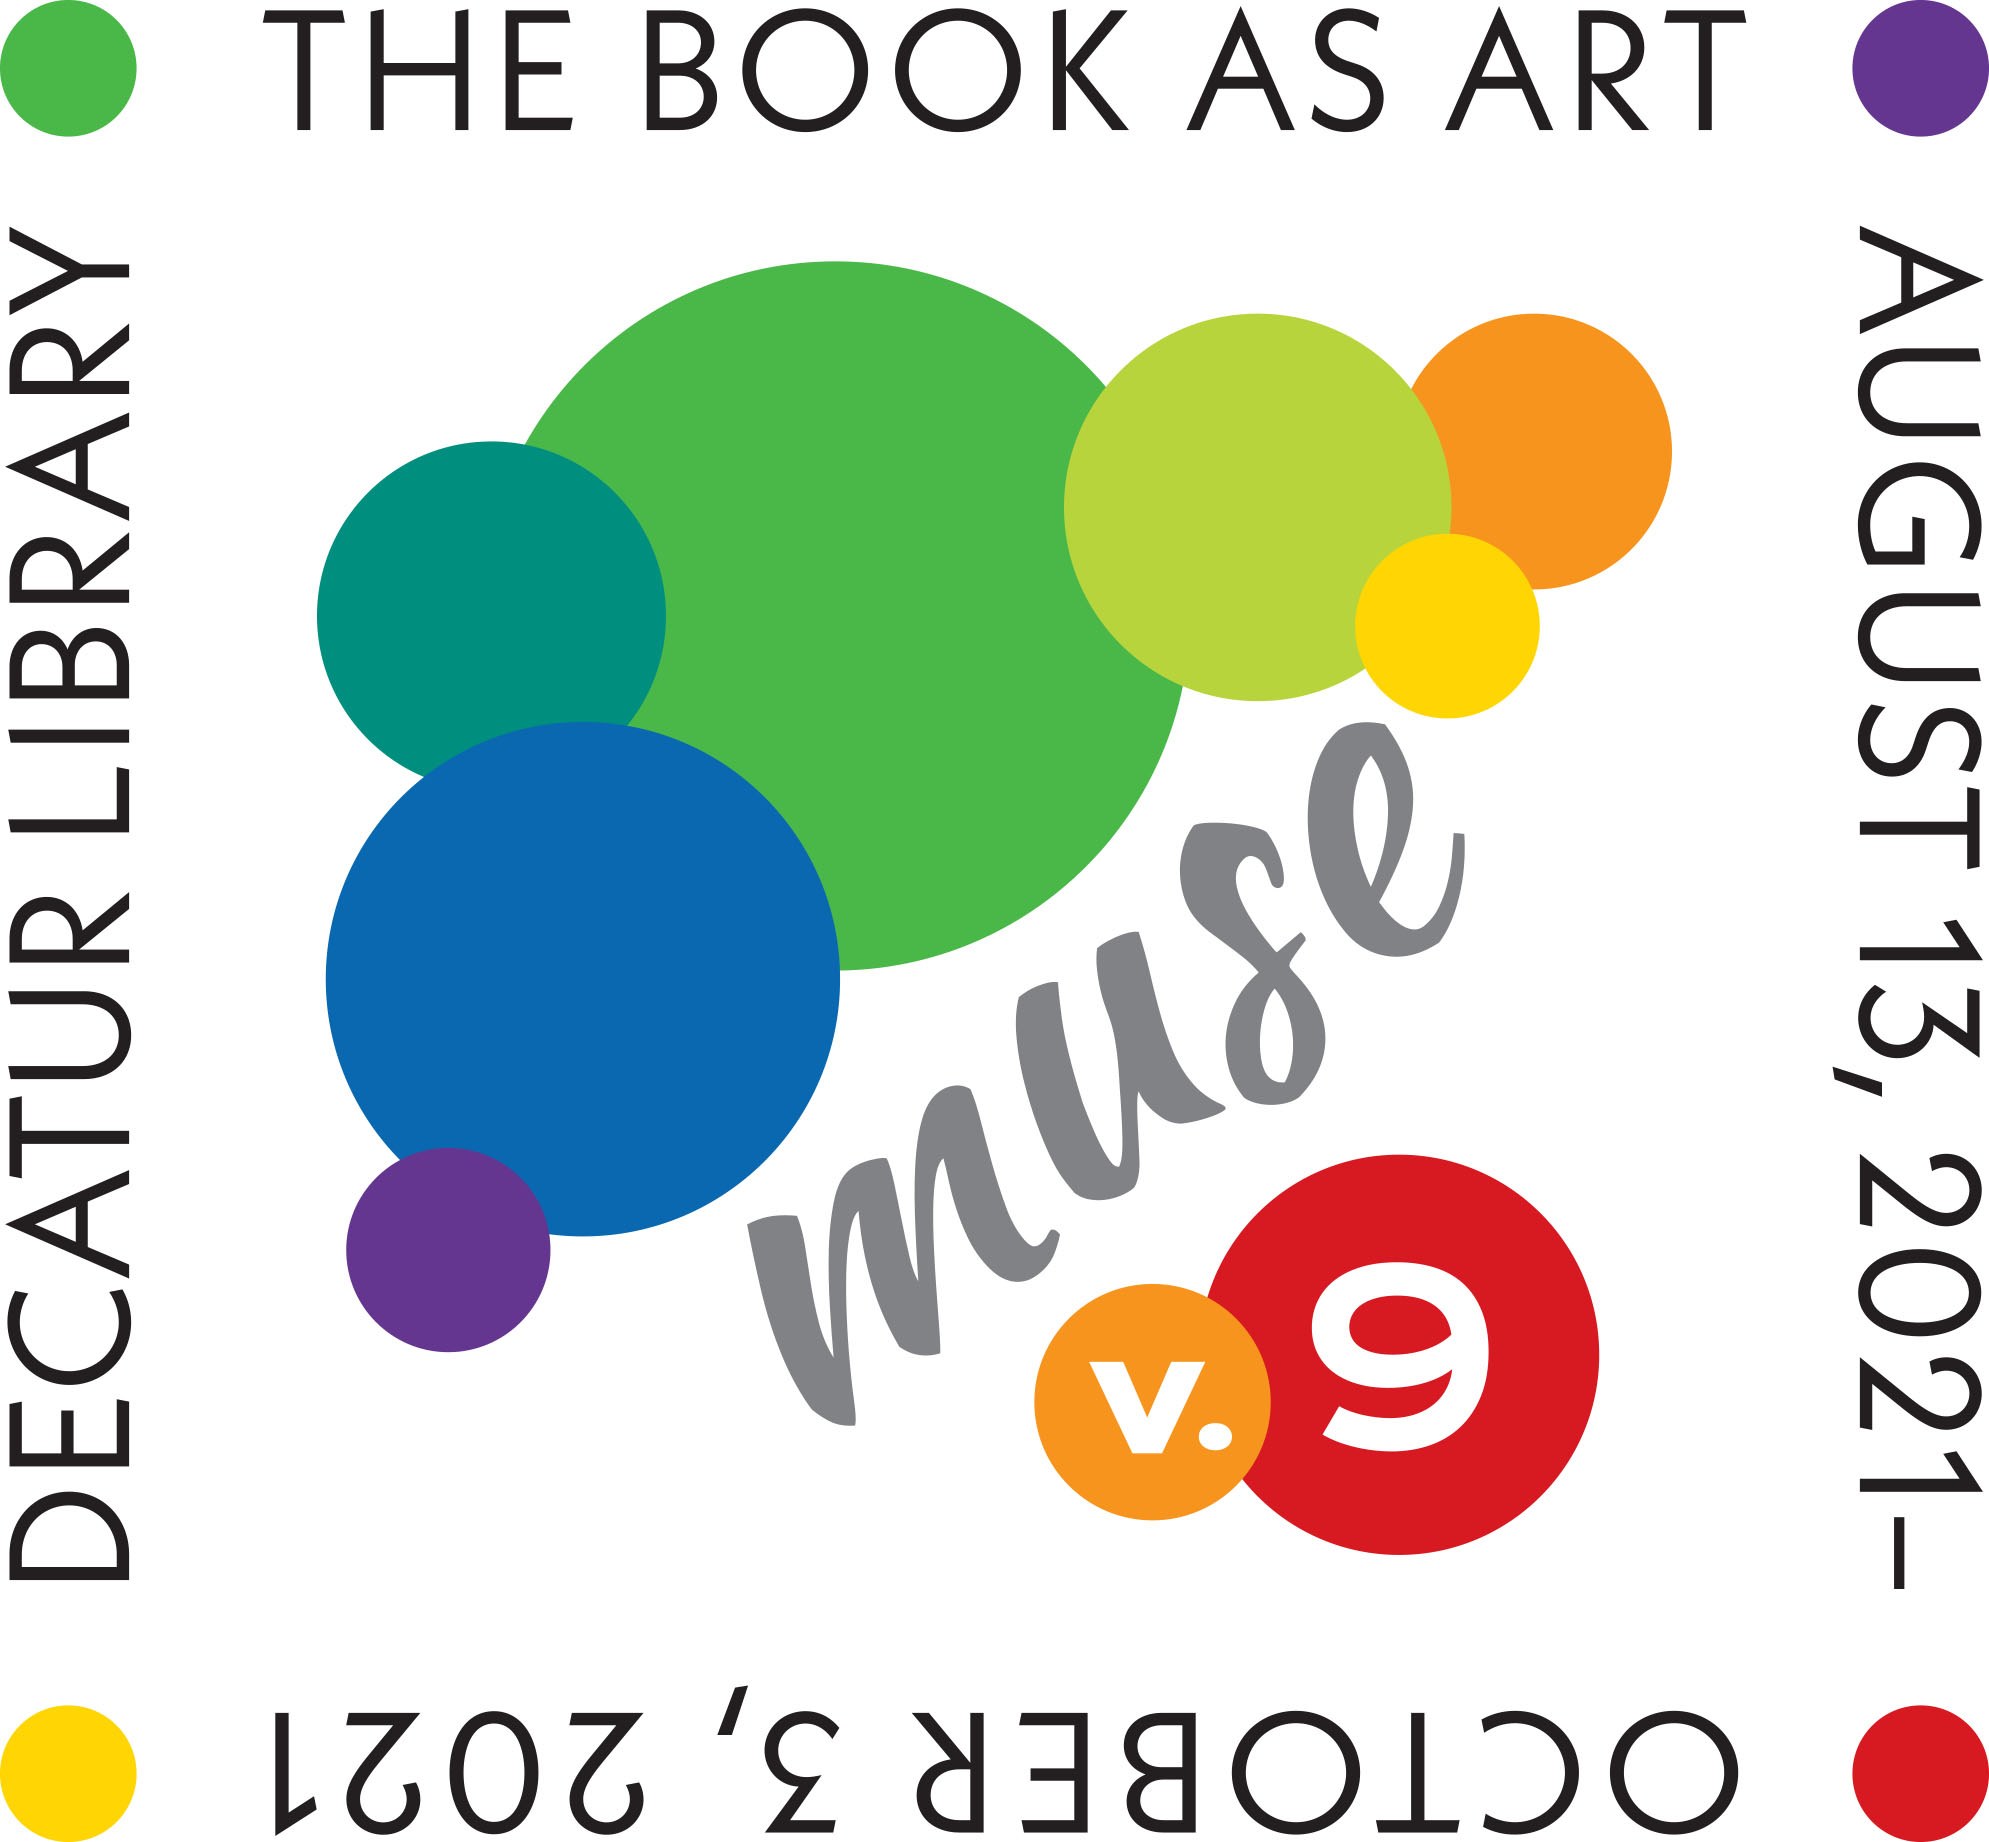 The Book as Art v.9: Muse (2021)